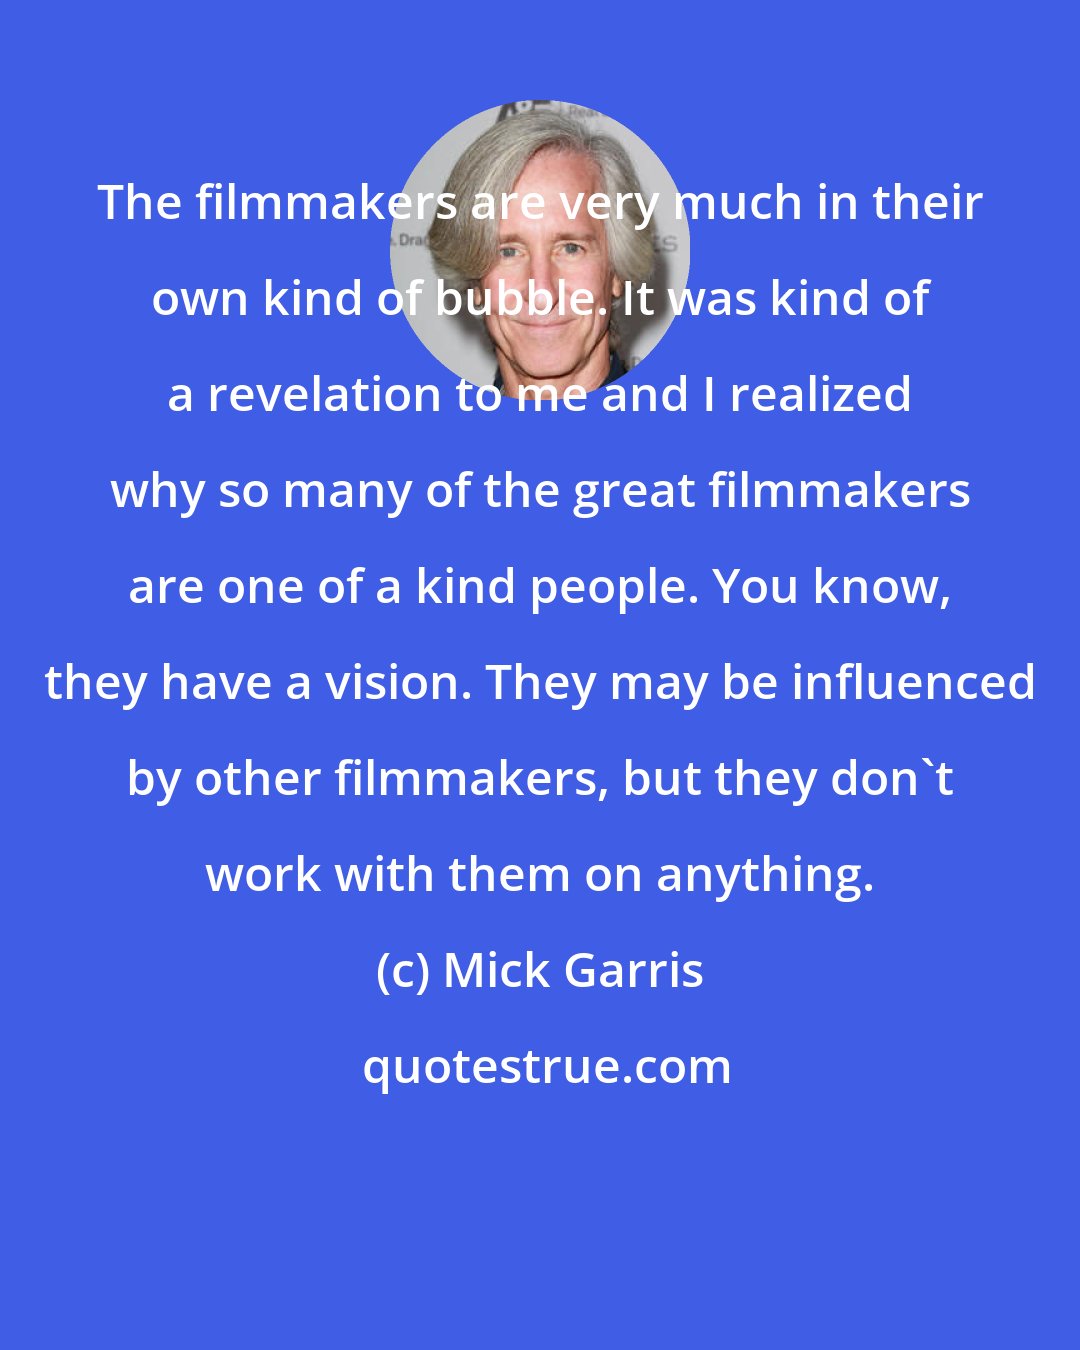 Mick Garris: The filmmakers are very much in their own kind of bubble. It was kind of a revelation to me and I realized why so many of the great filmmakers are one of a kind people. You know, they have a vision. They may be influenced by other filmmakers, but they don't work with them on anything.